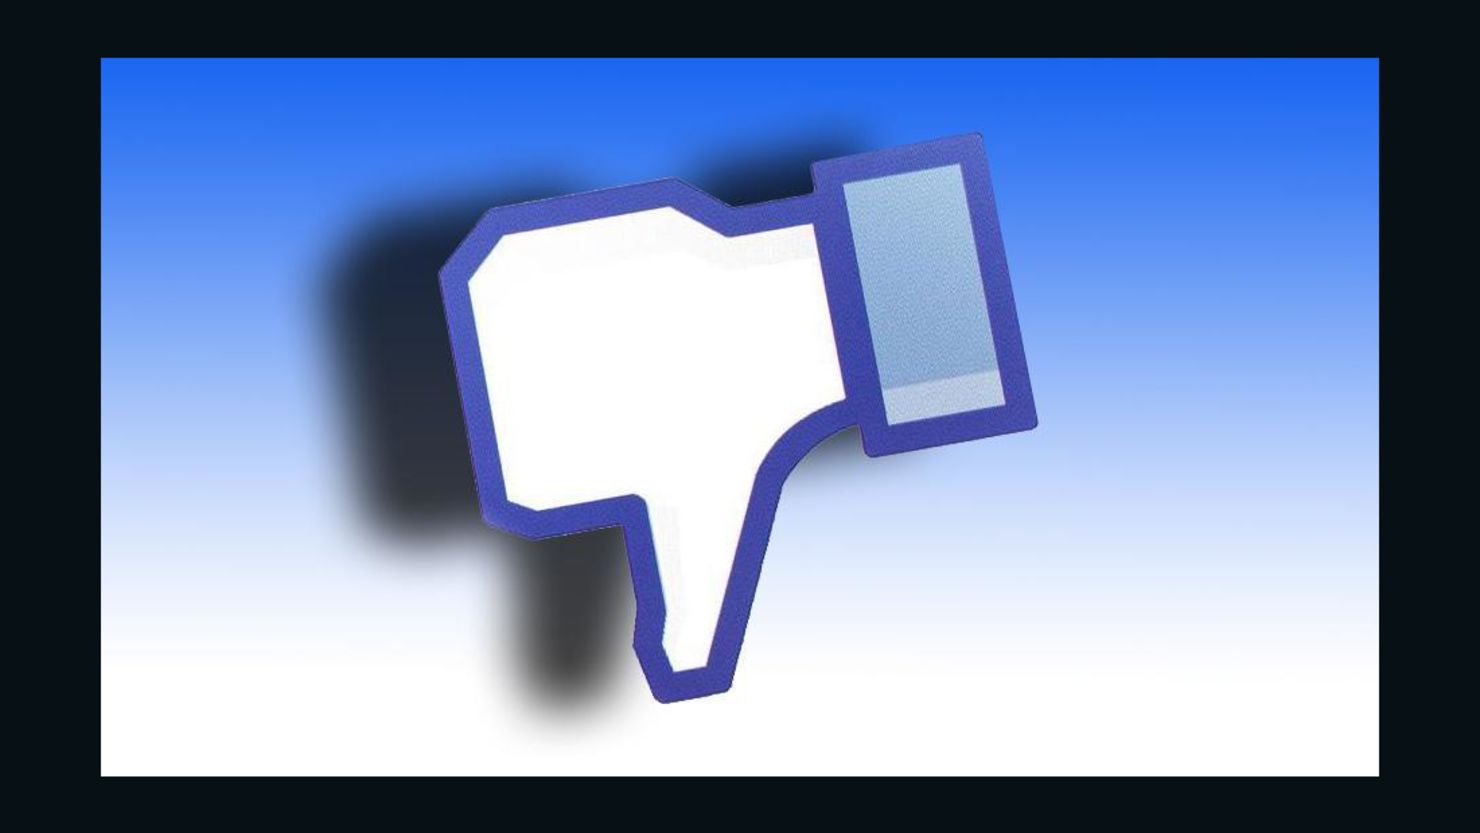 An error with Facebook's log-in tool killed access to hundreds of sites for about 10 minutes Thursday evening.